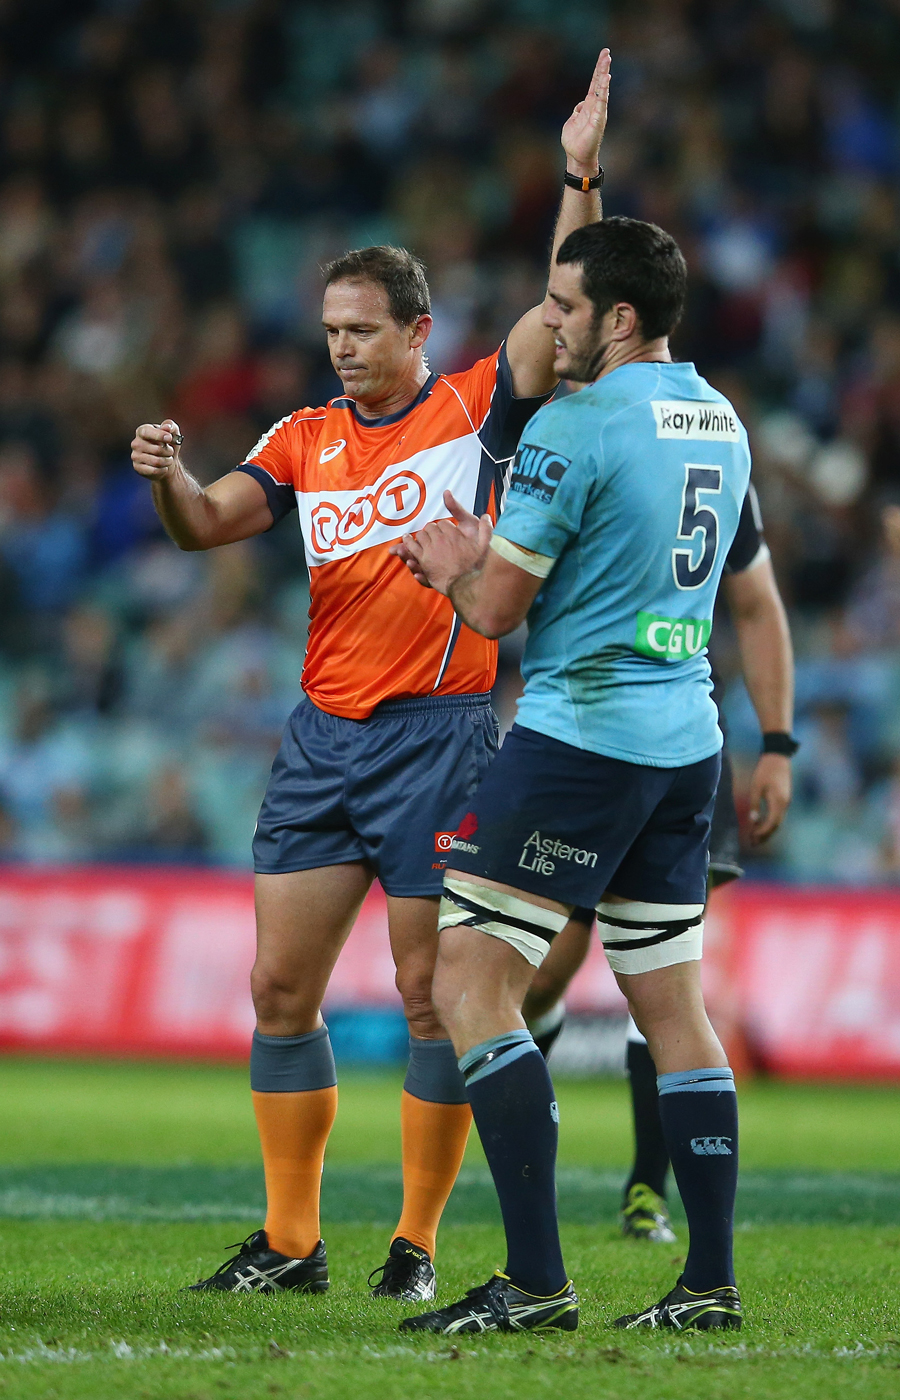 Referee Rohan Hoffmann awards a penalty against the Sharks